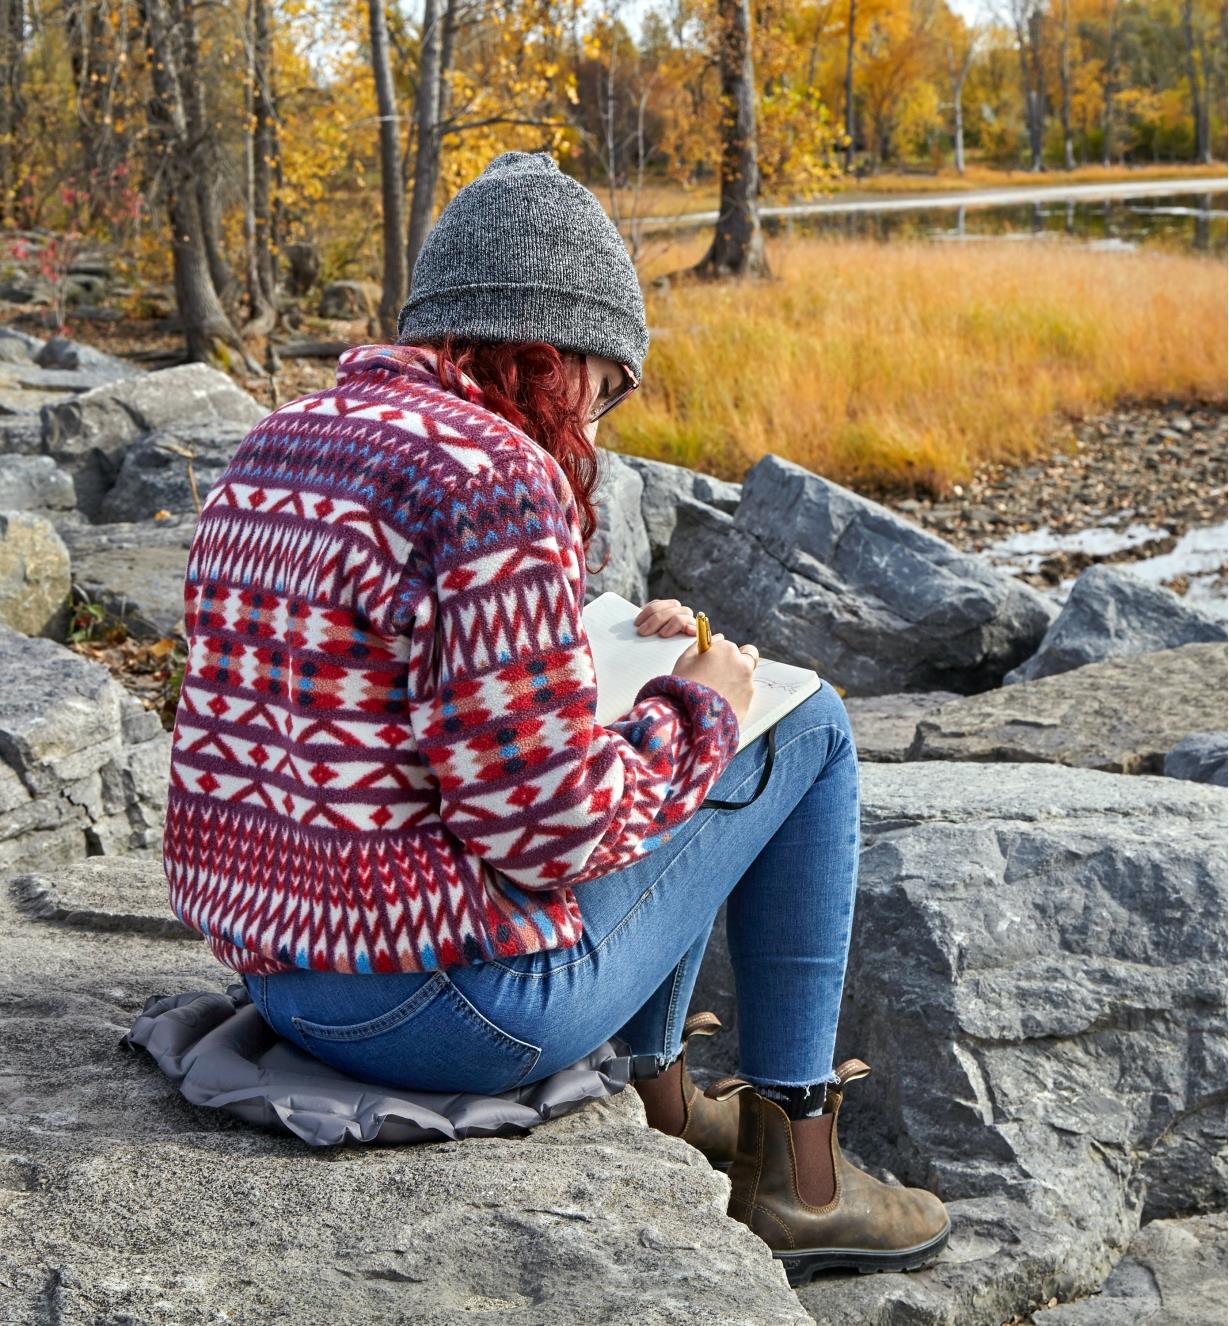 A woman sits on an inflatable seat cushion placed on a rock while writing notes outdoors